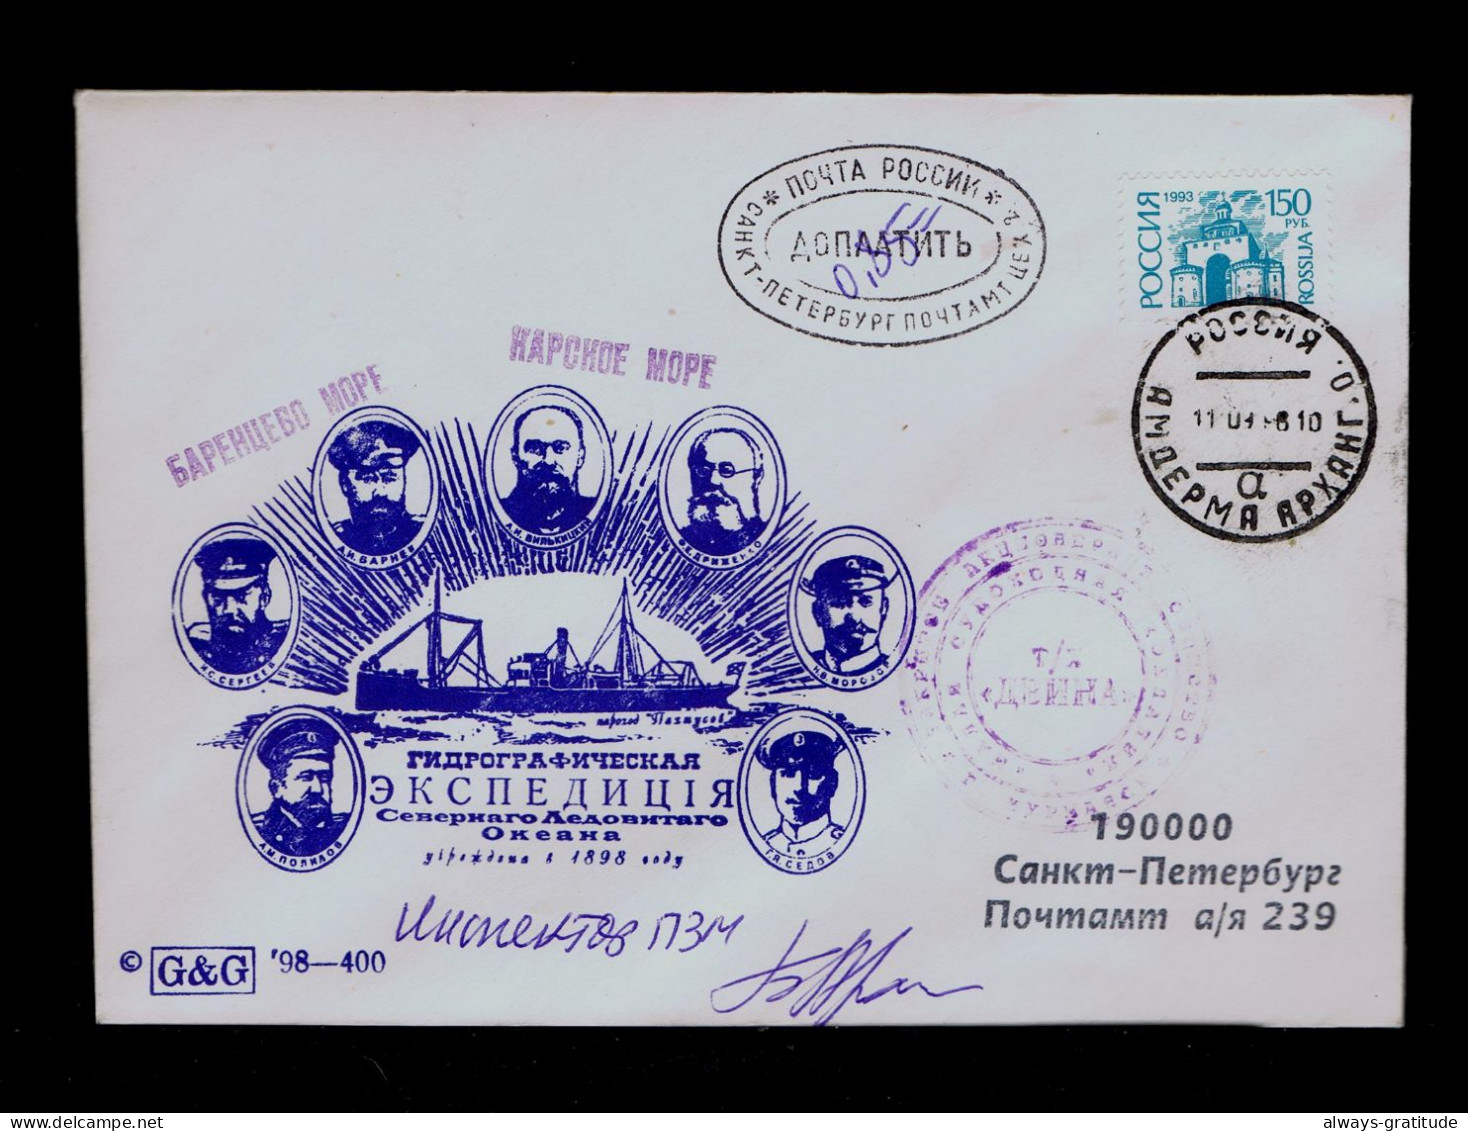 Sp10448 RUSSIE SERGEER VILKITSKY "DRIZHENKO" Hidrography Survey Artic Nord Ship DVINA Anderma Cover Postal Stationery - Expéditions Arctiques